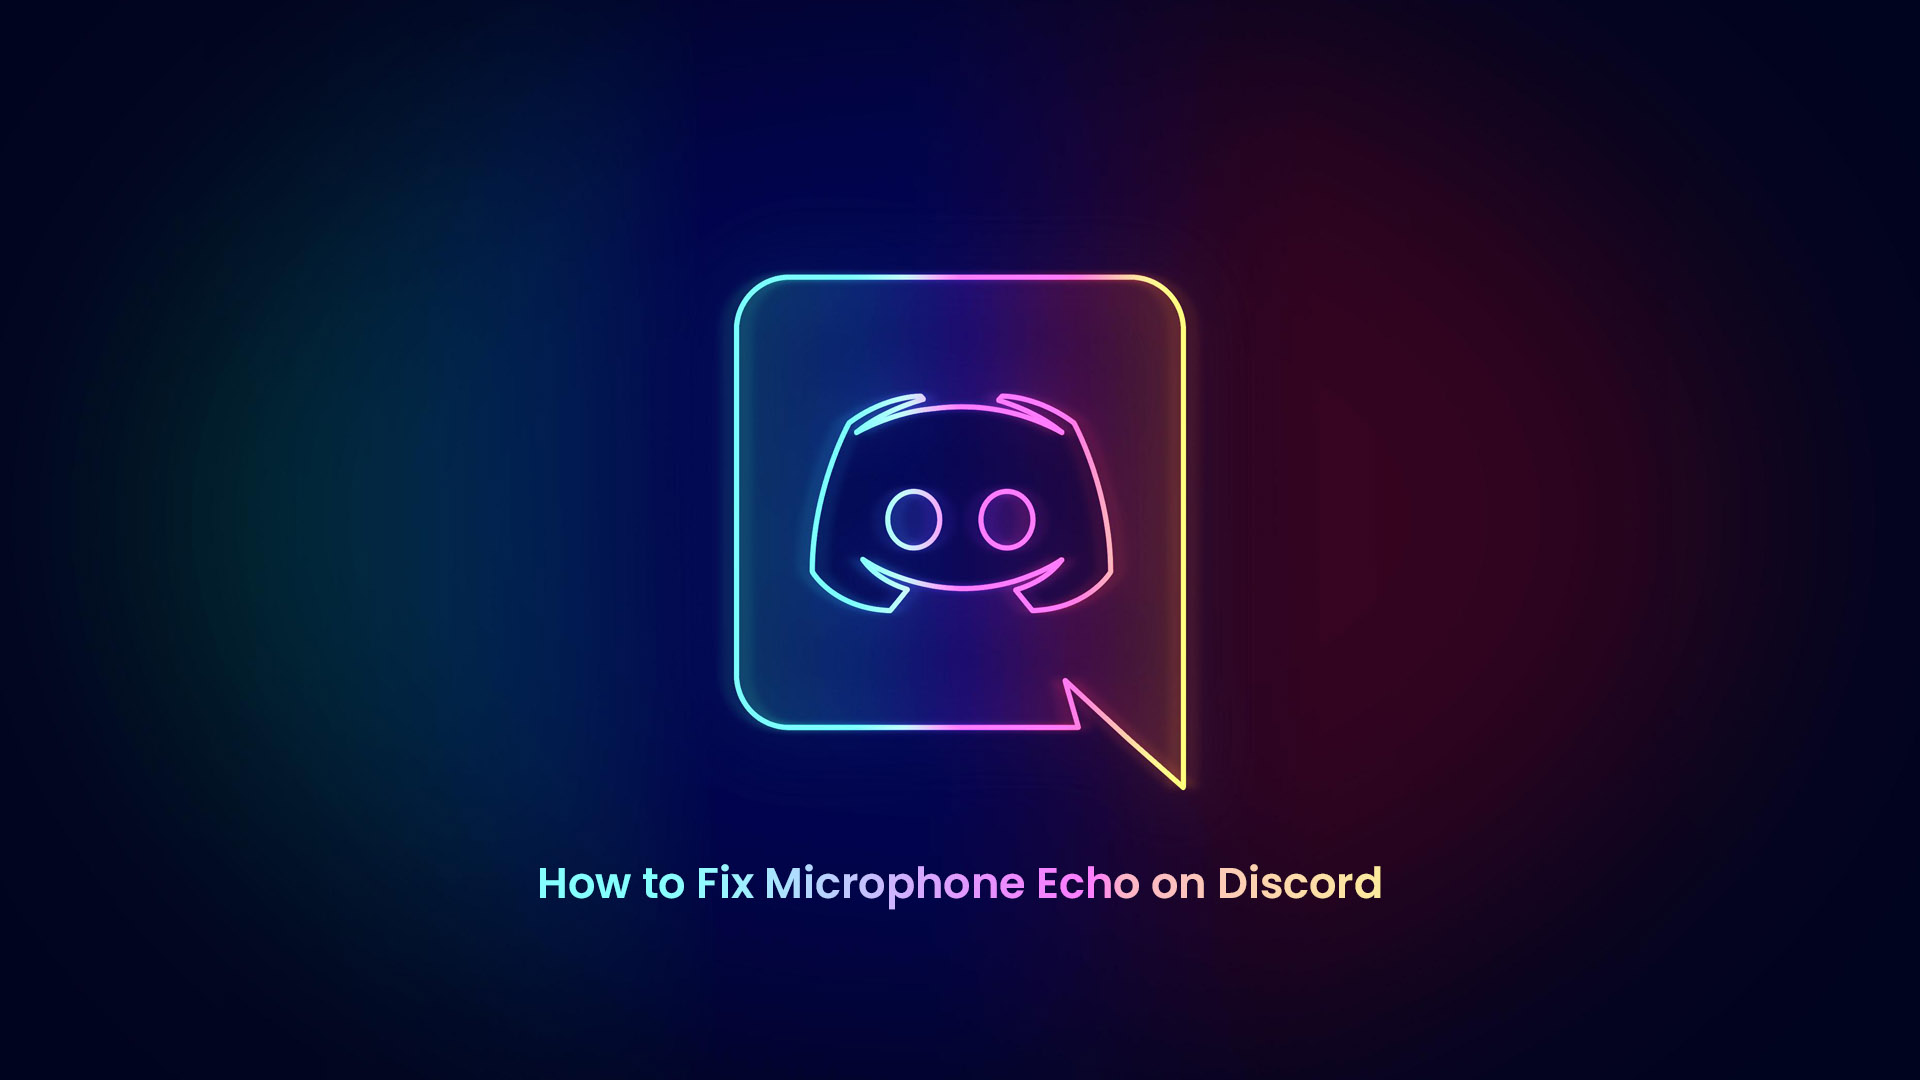 How to Fix Microphone Echo on Discord